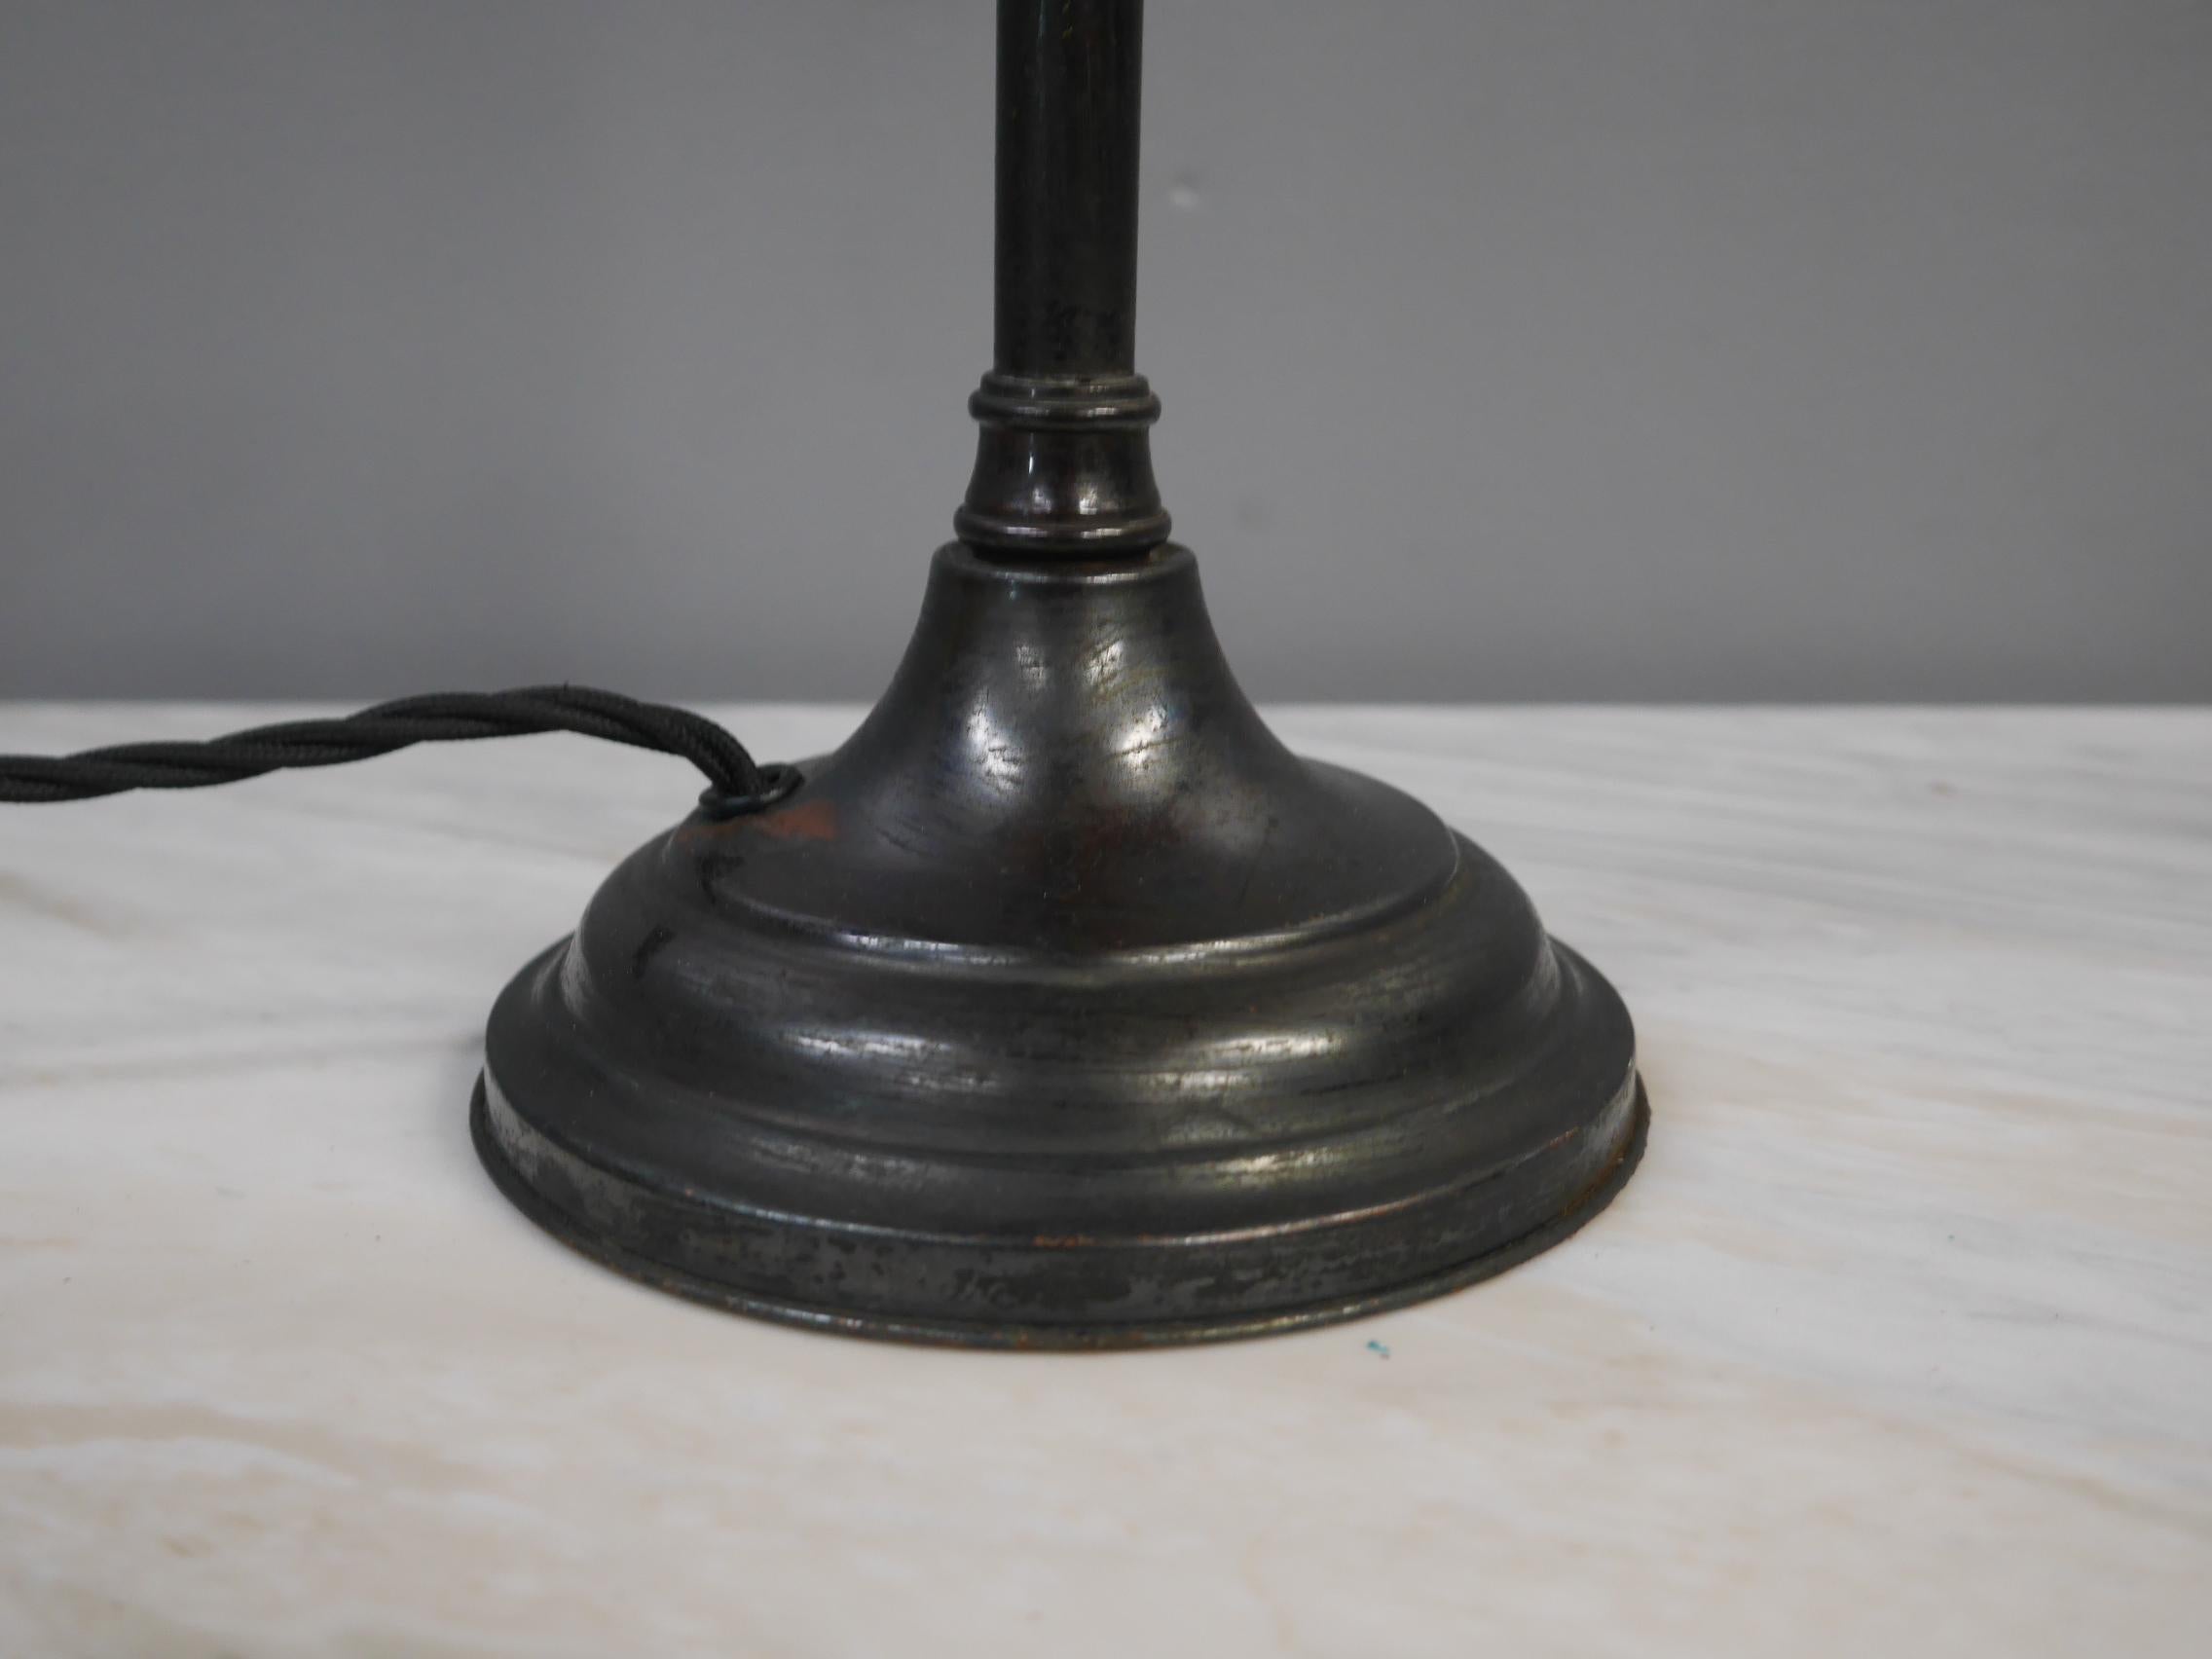 1920's Industrial Desk Lamp In Good Condition For Sale In Downham Market, GB